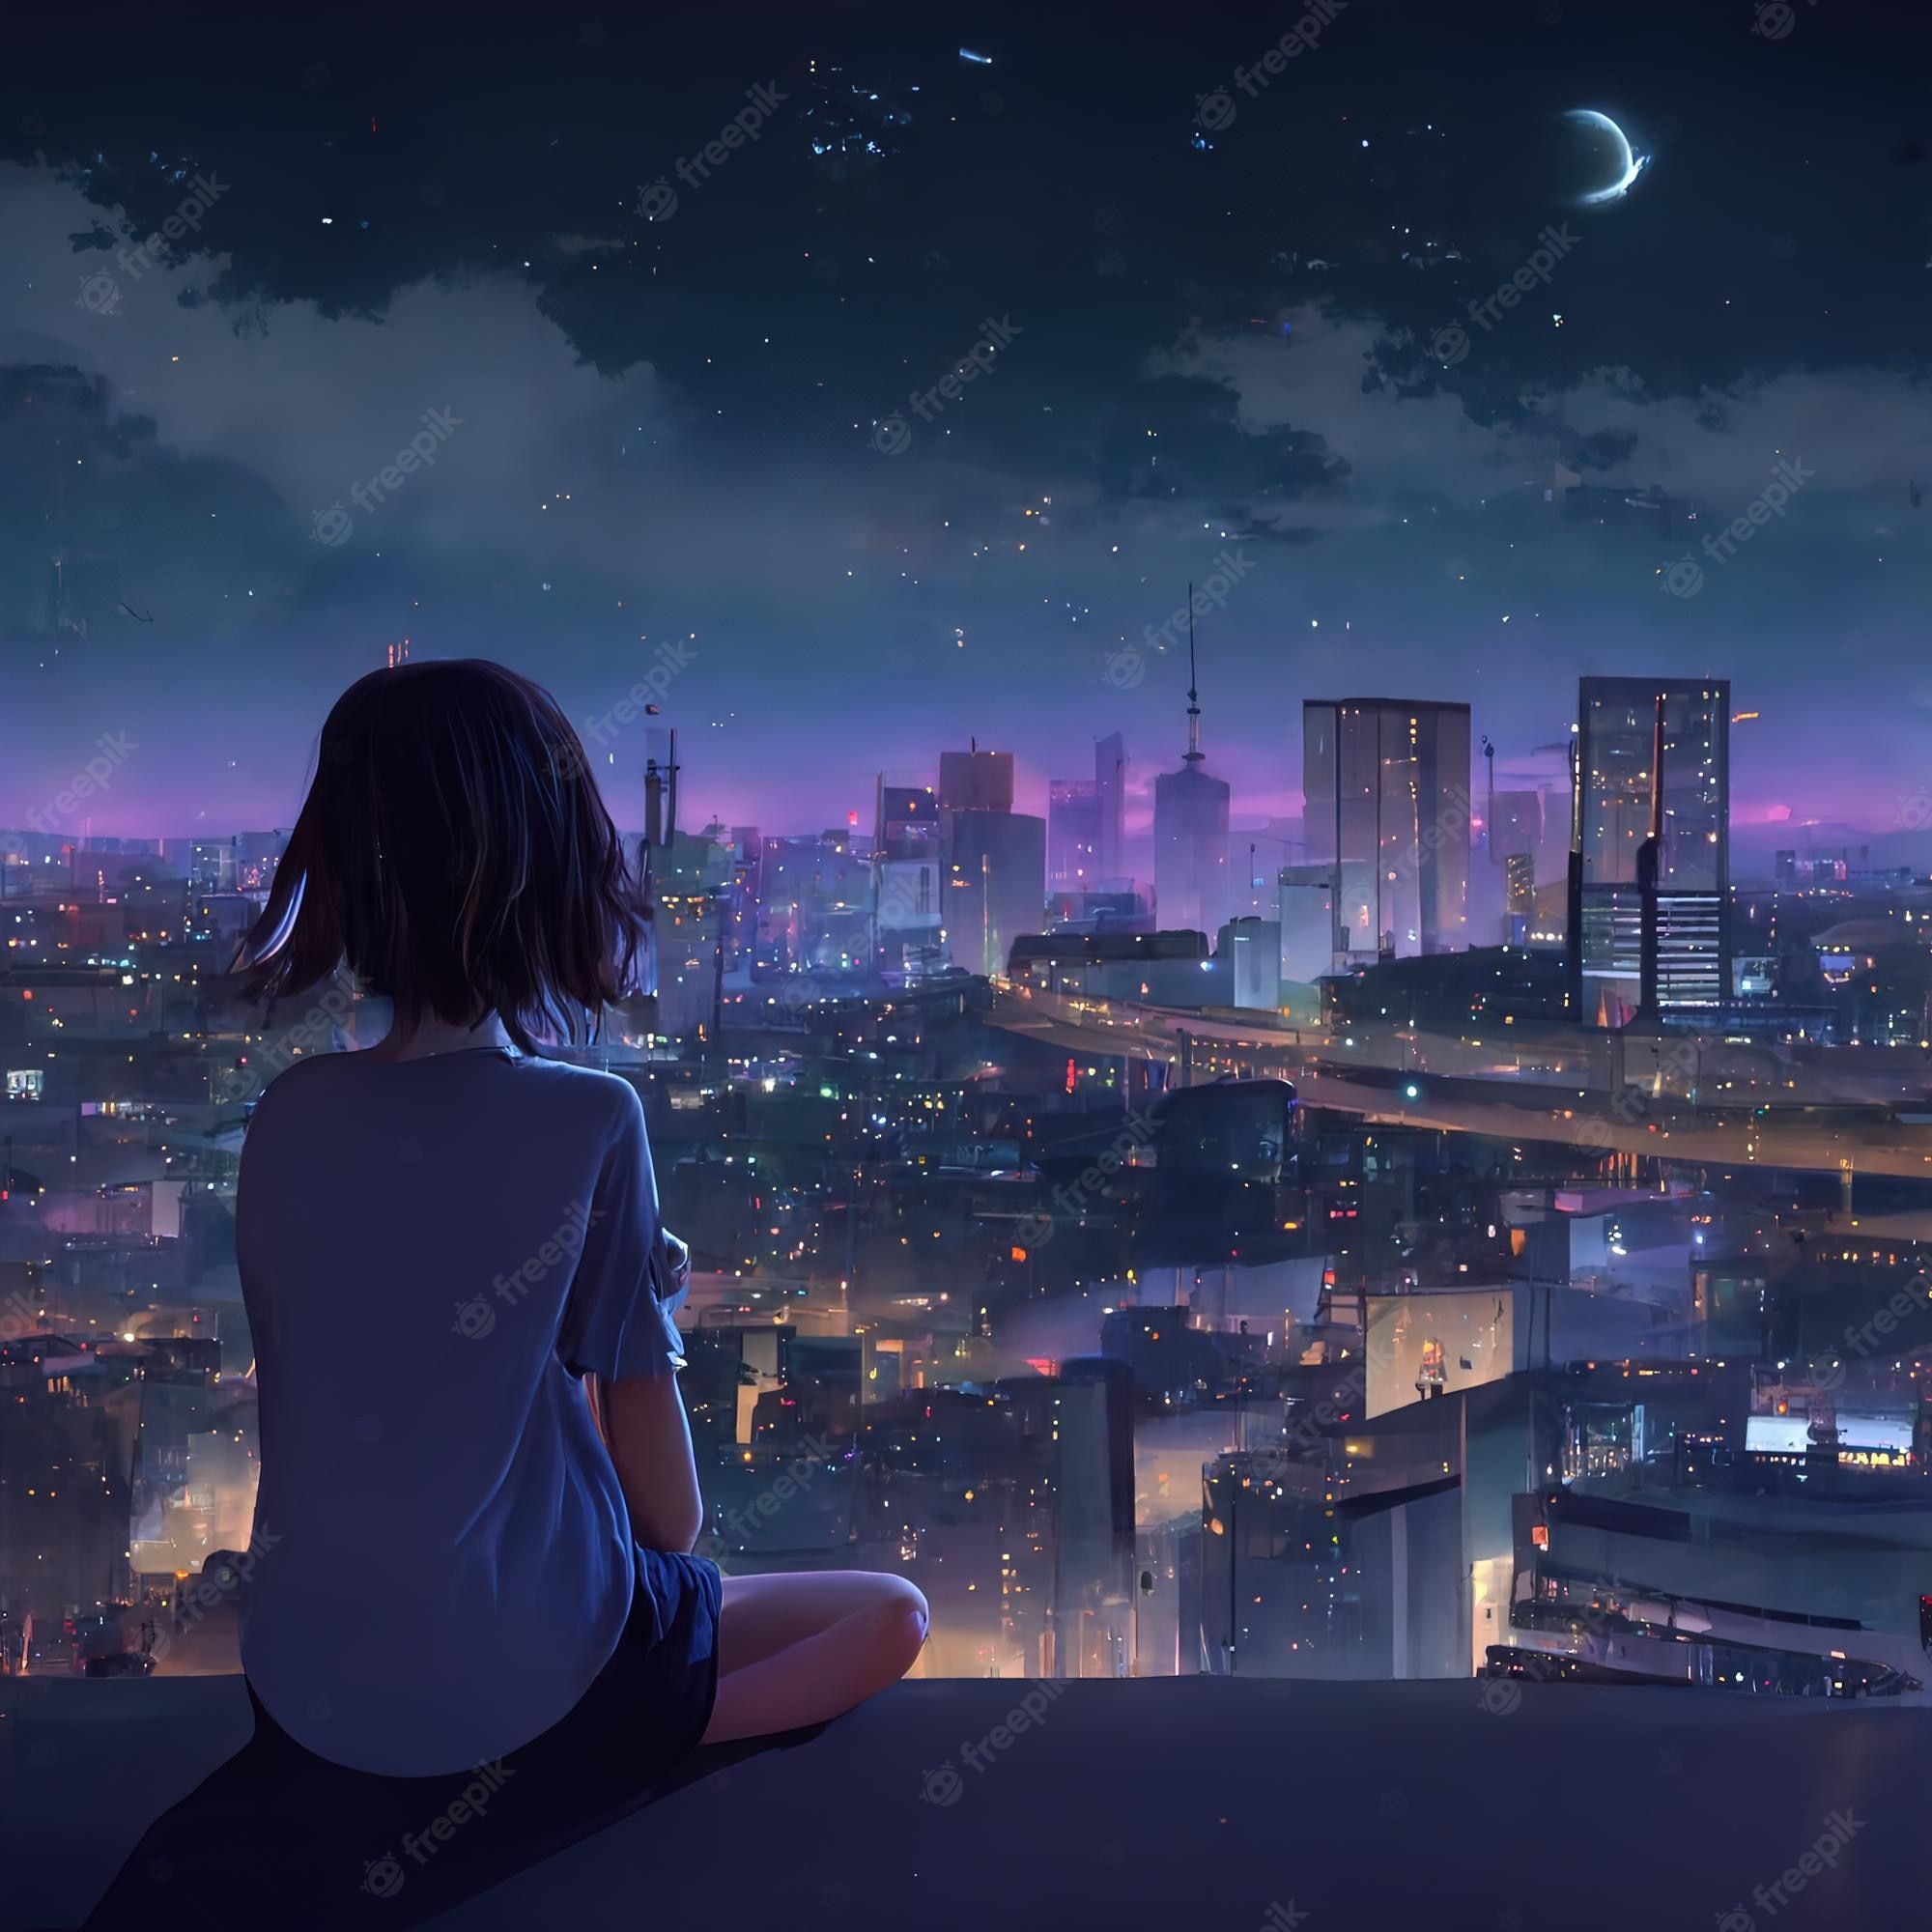 A girl sitting on the edge of her balcony looking at city lights - Lo fi